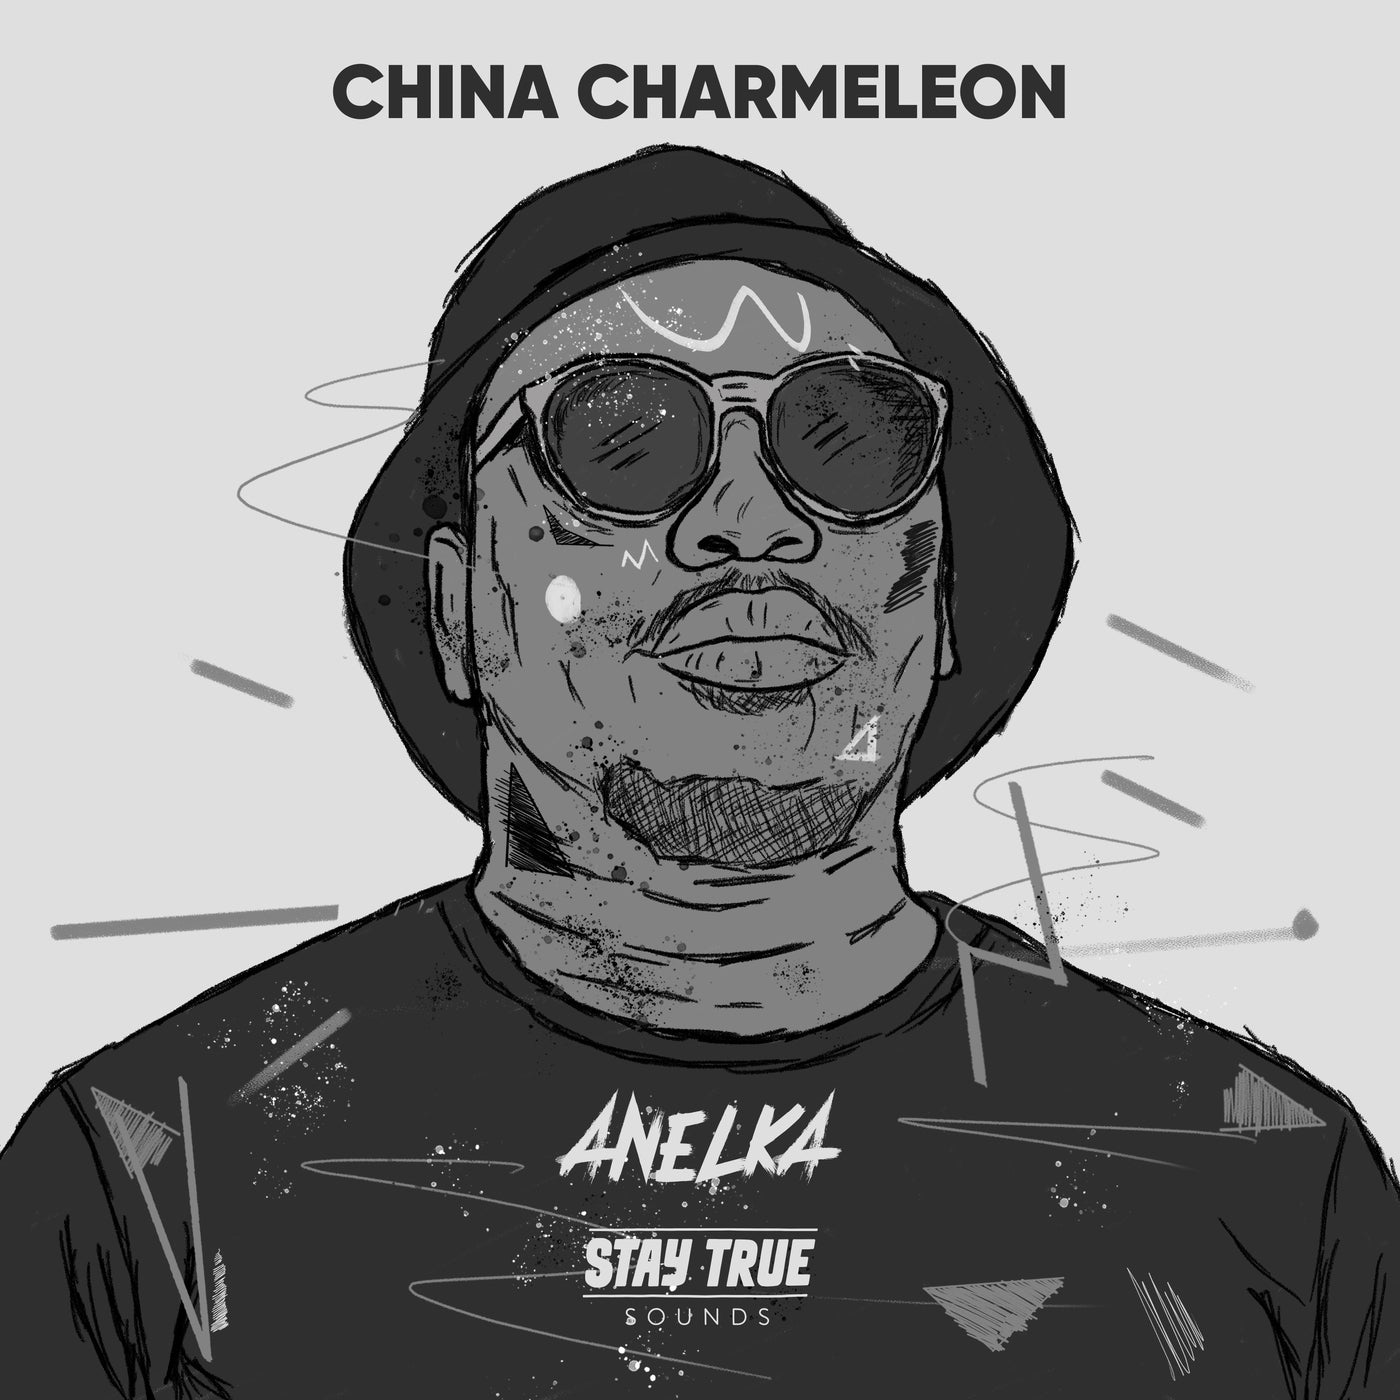 China Charmeleon, Exte C - Anelka [Stay True Sounds]